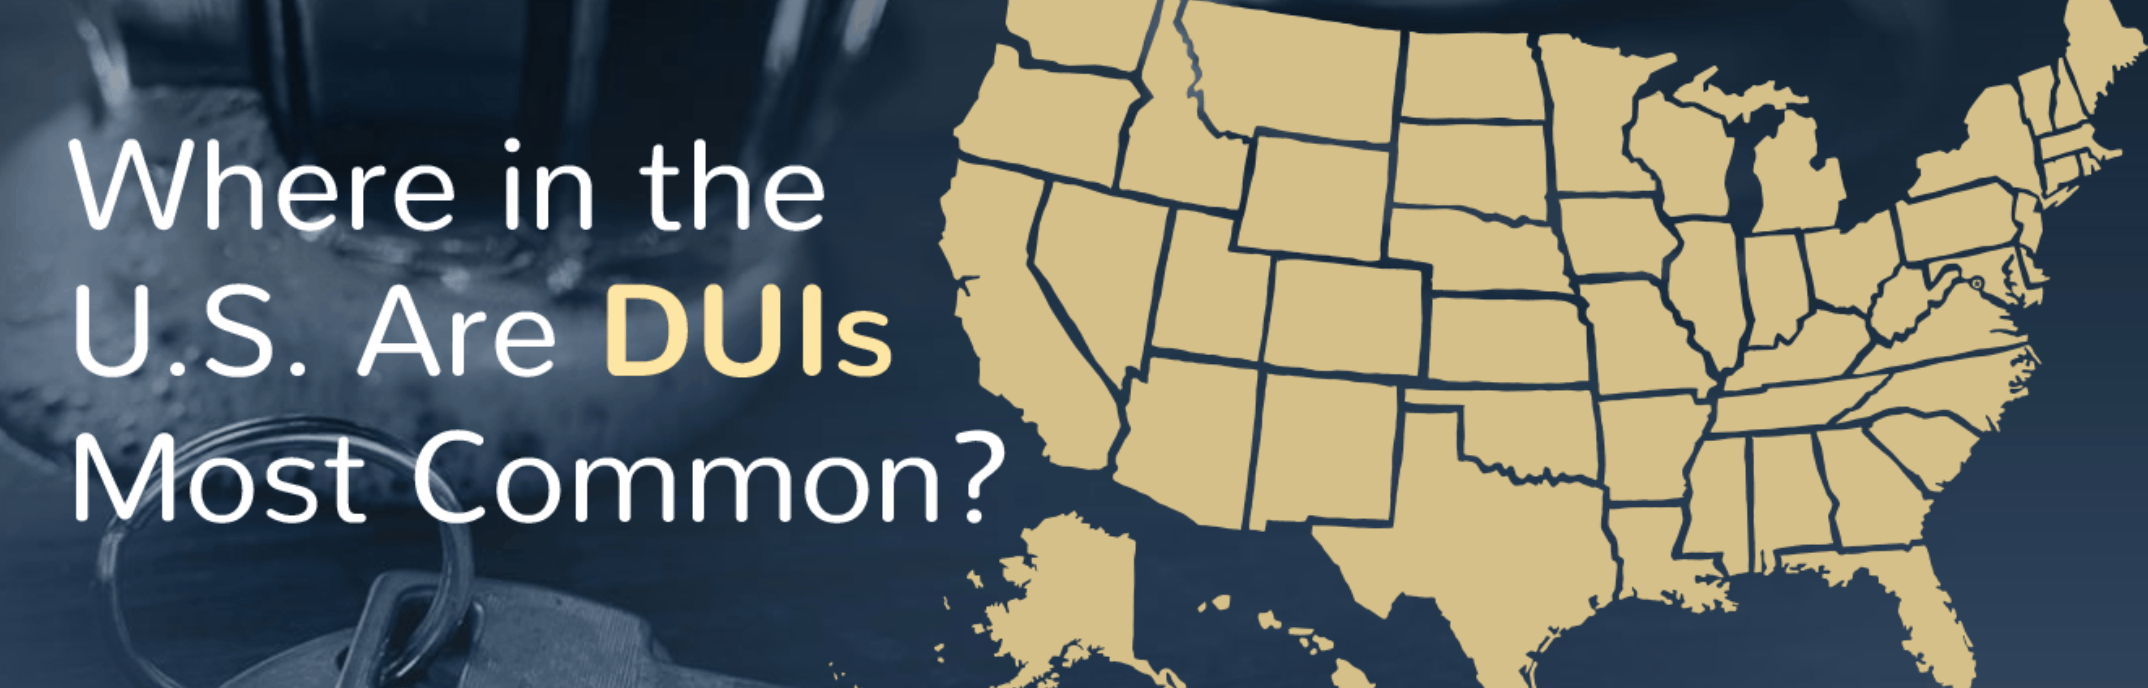 Where in the U.S. Are DUIs Most Common? Featured Image